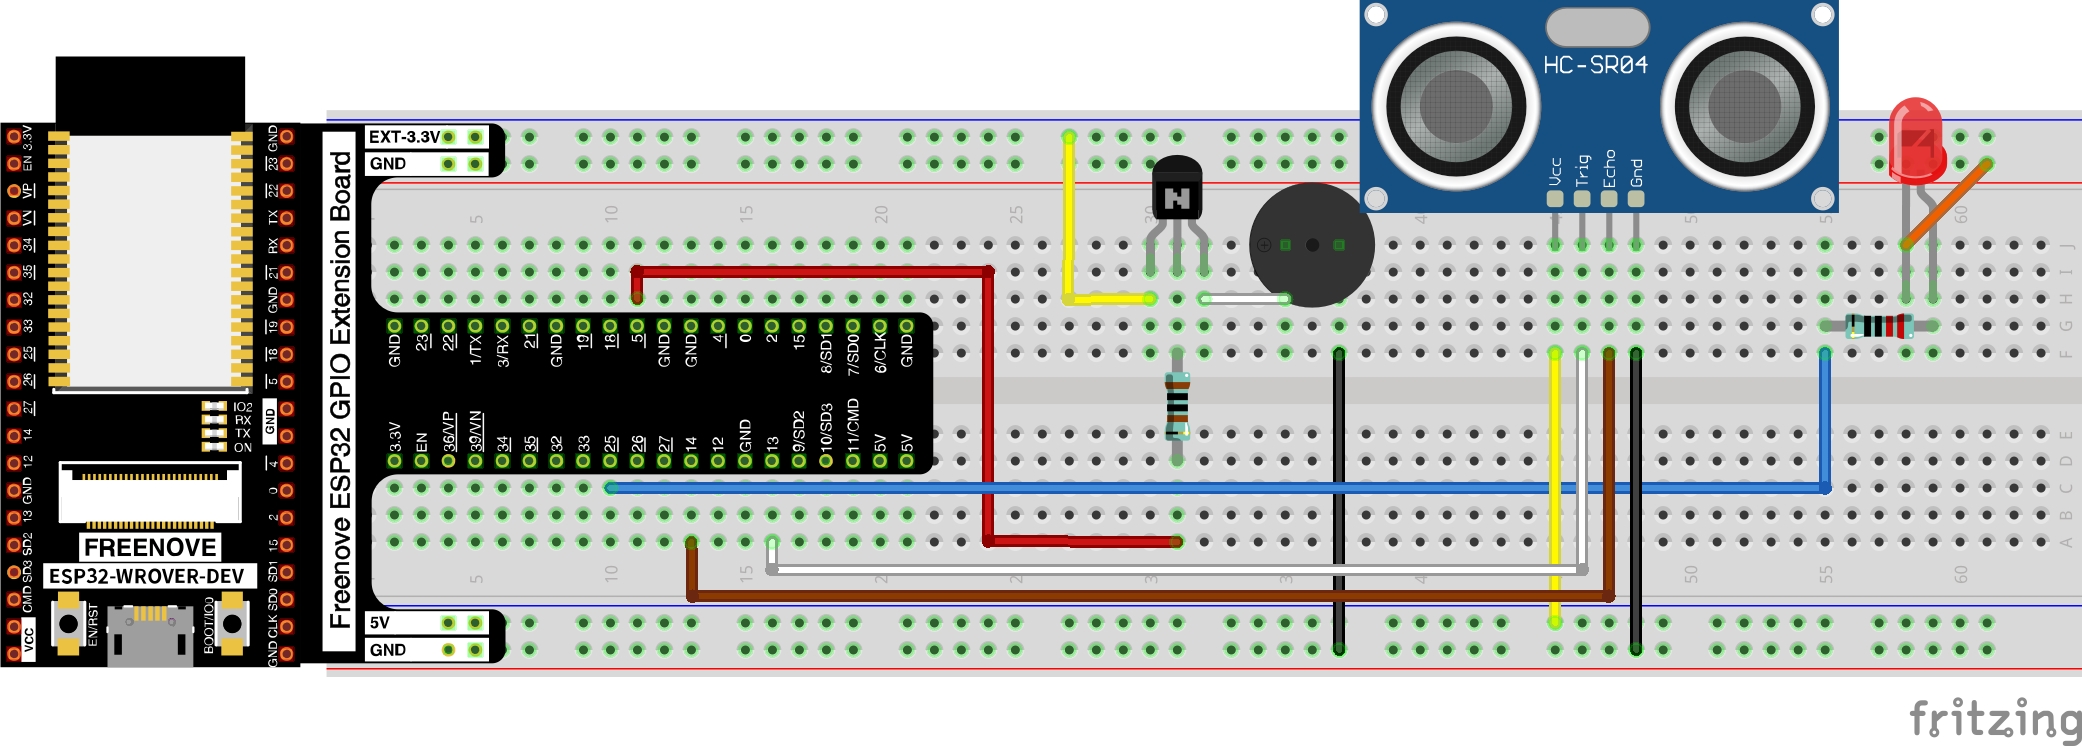 Ultrasonic Ranging, a passive buzzer, an LED Breadboard View image